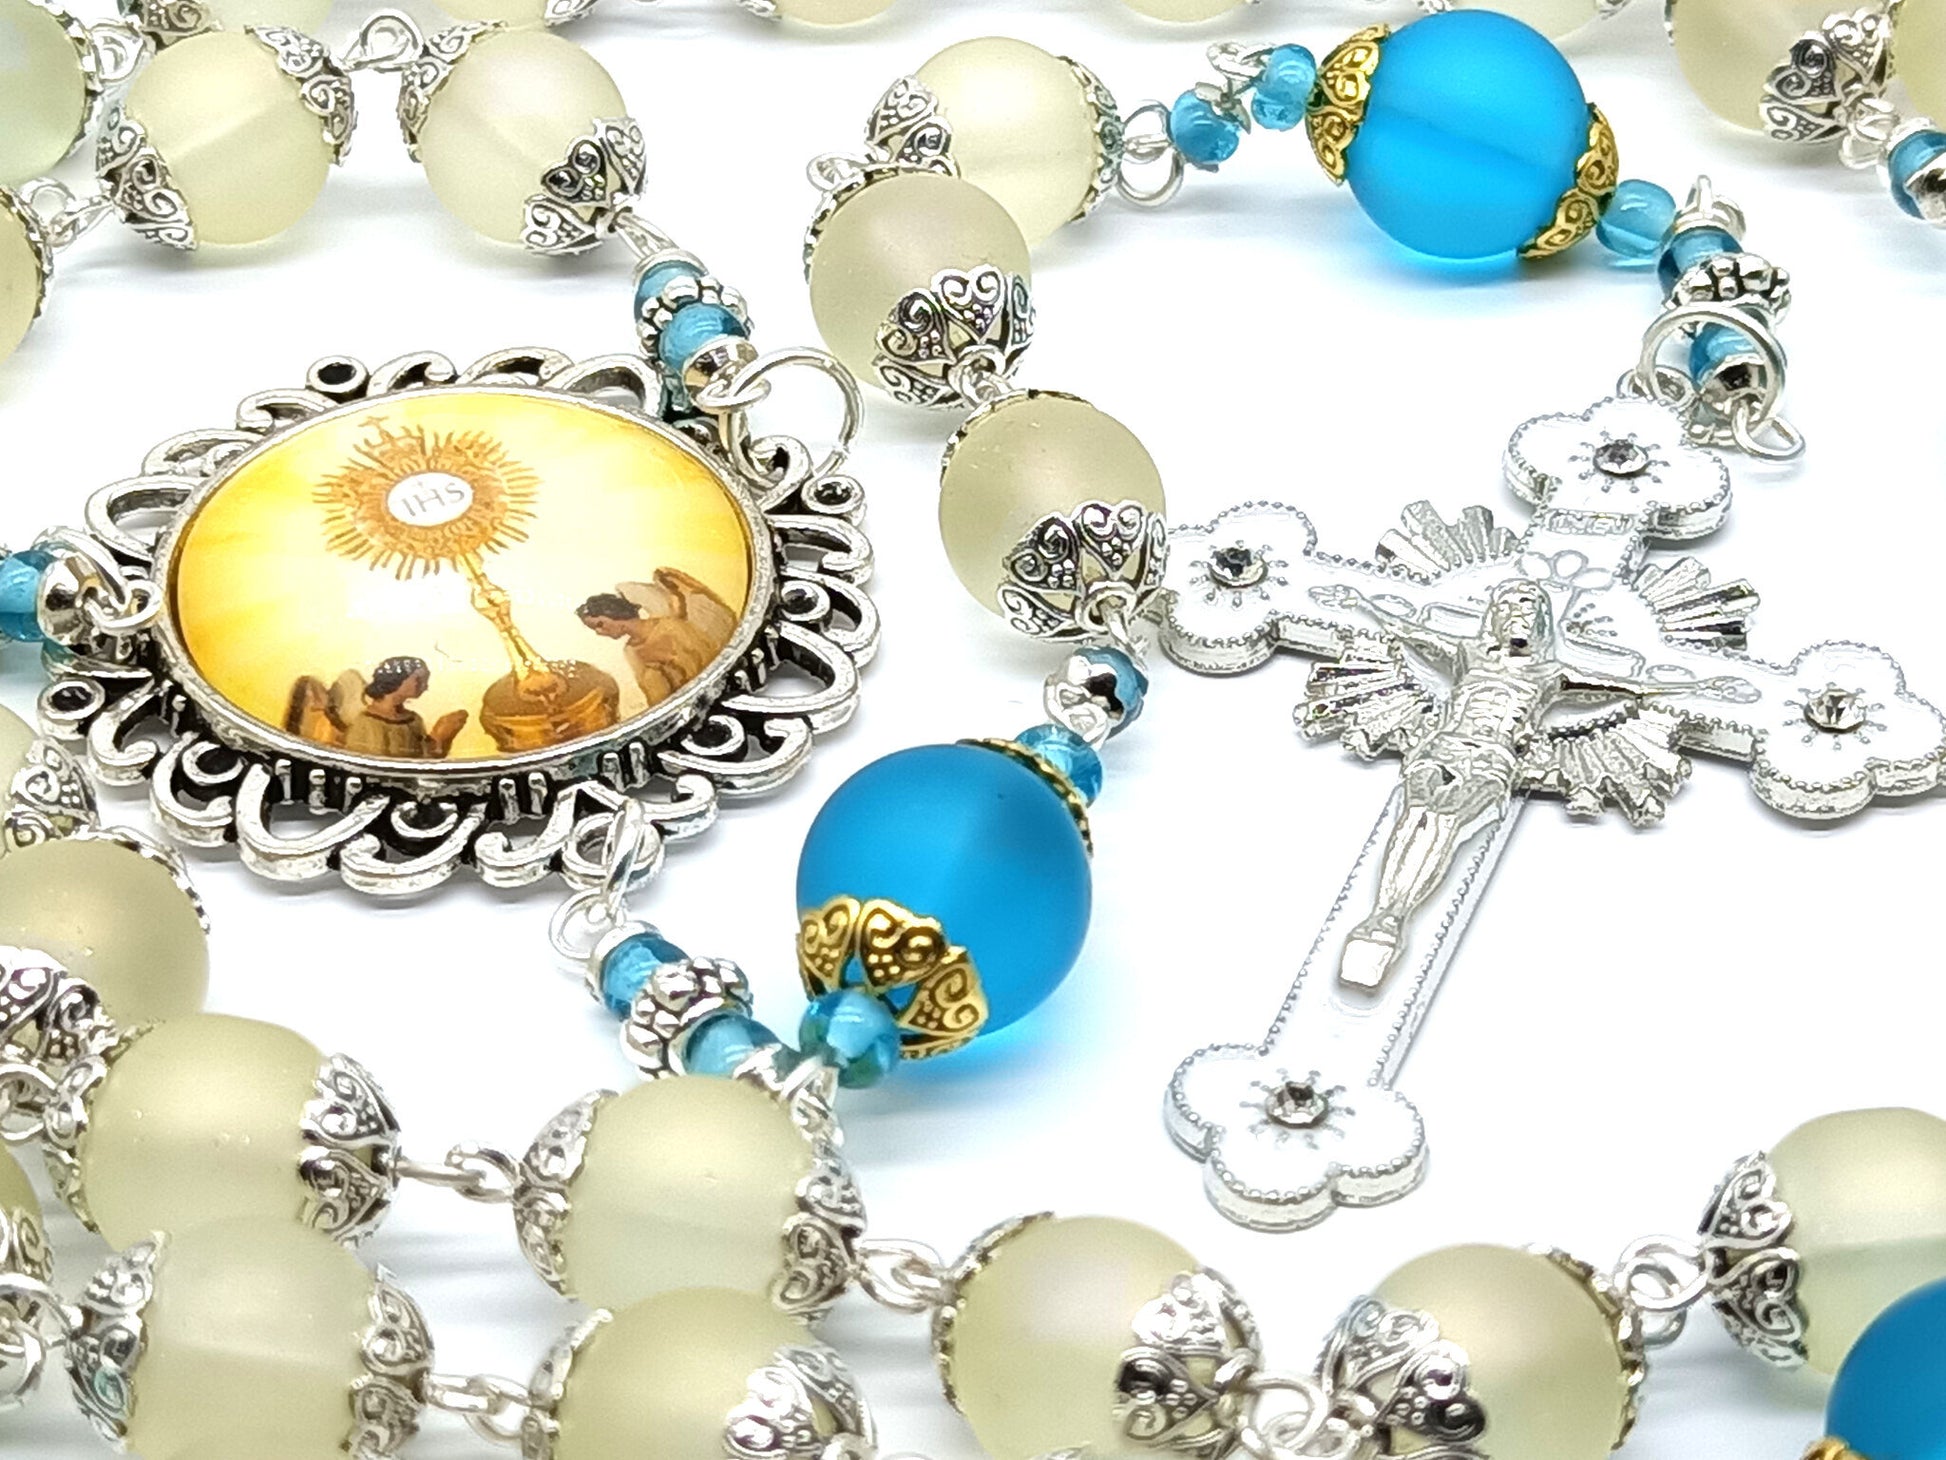 Confirmation unique rosary beads with frosted off white and blue glass beads, silver and white enamel crucifix and picture centre medal.